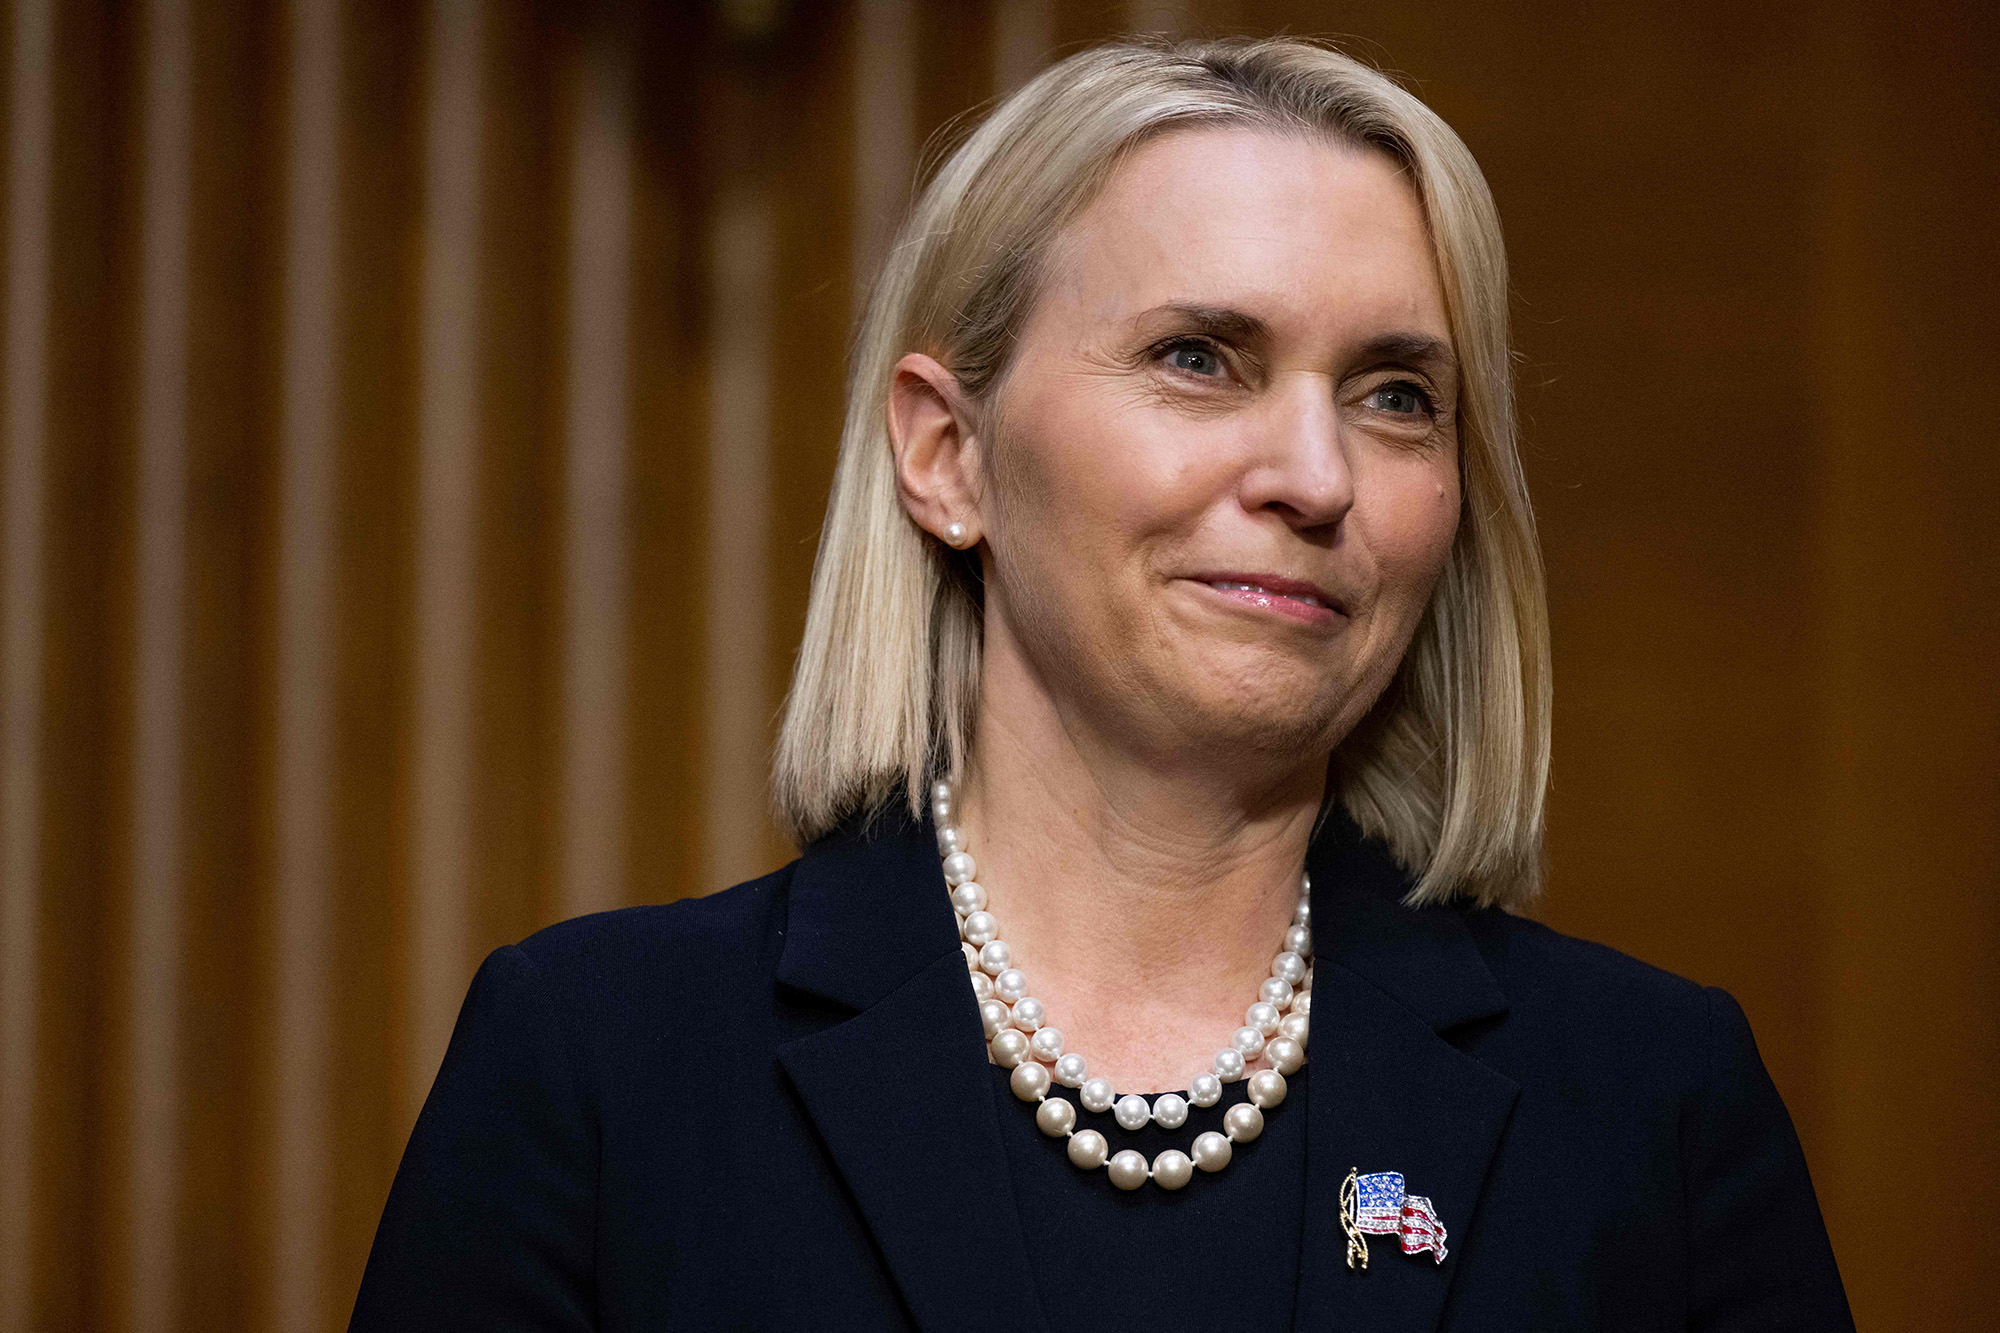 Bridget Brink arrives to testify on her nomination to be US Ambassador to Ukraine during a Senate Foreign Relations Committee hearing on Capitol Hill in Washington, DC, on May 10, 2022. (Photo by SAUL LOEB / AFP) (Photo by SAUL LOEB/AFP via Getty Images)